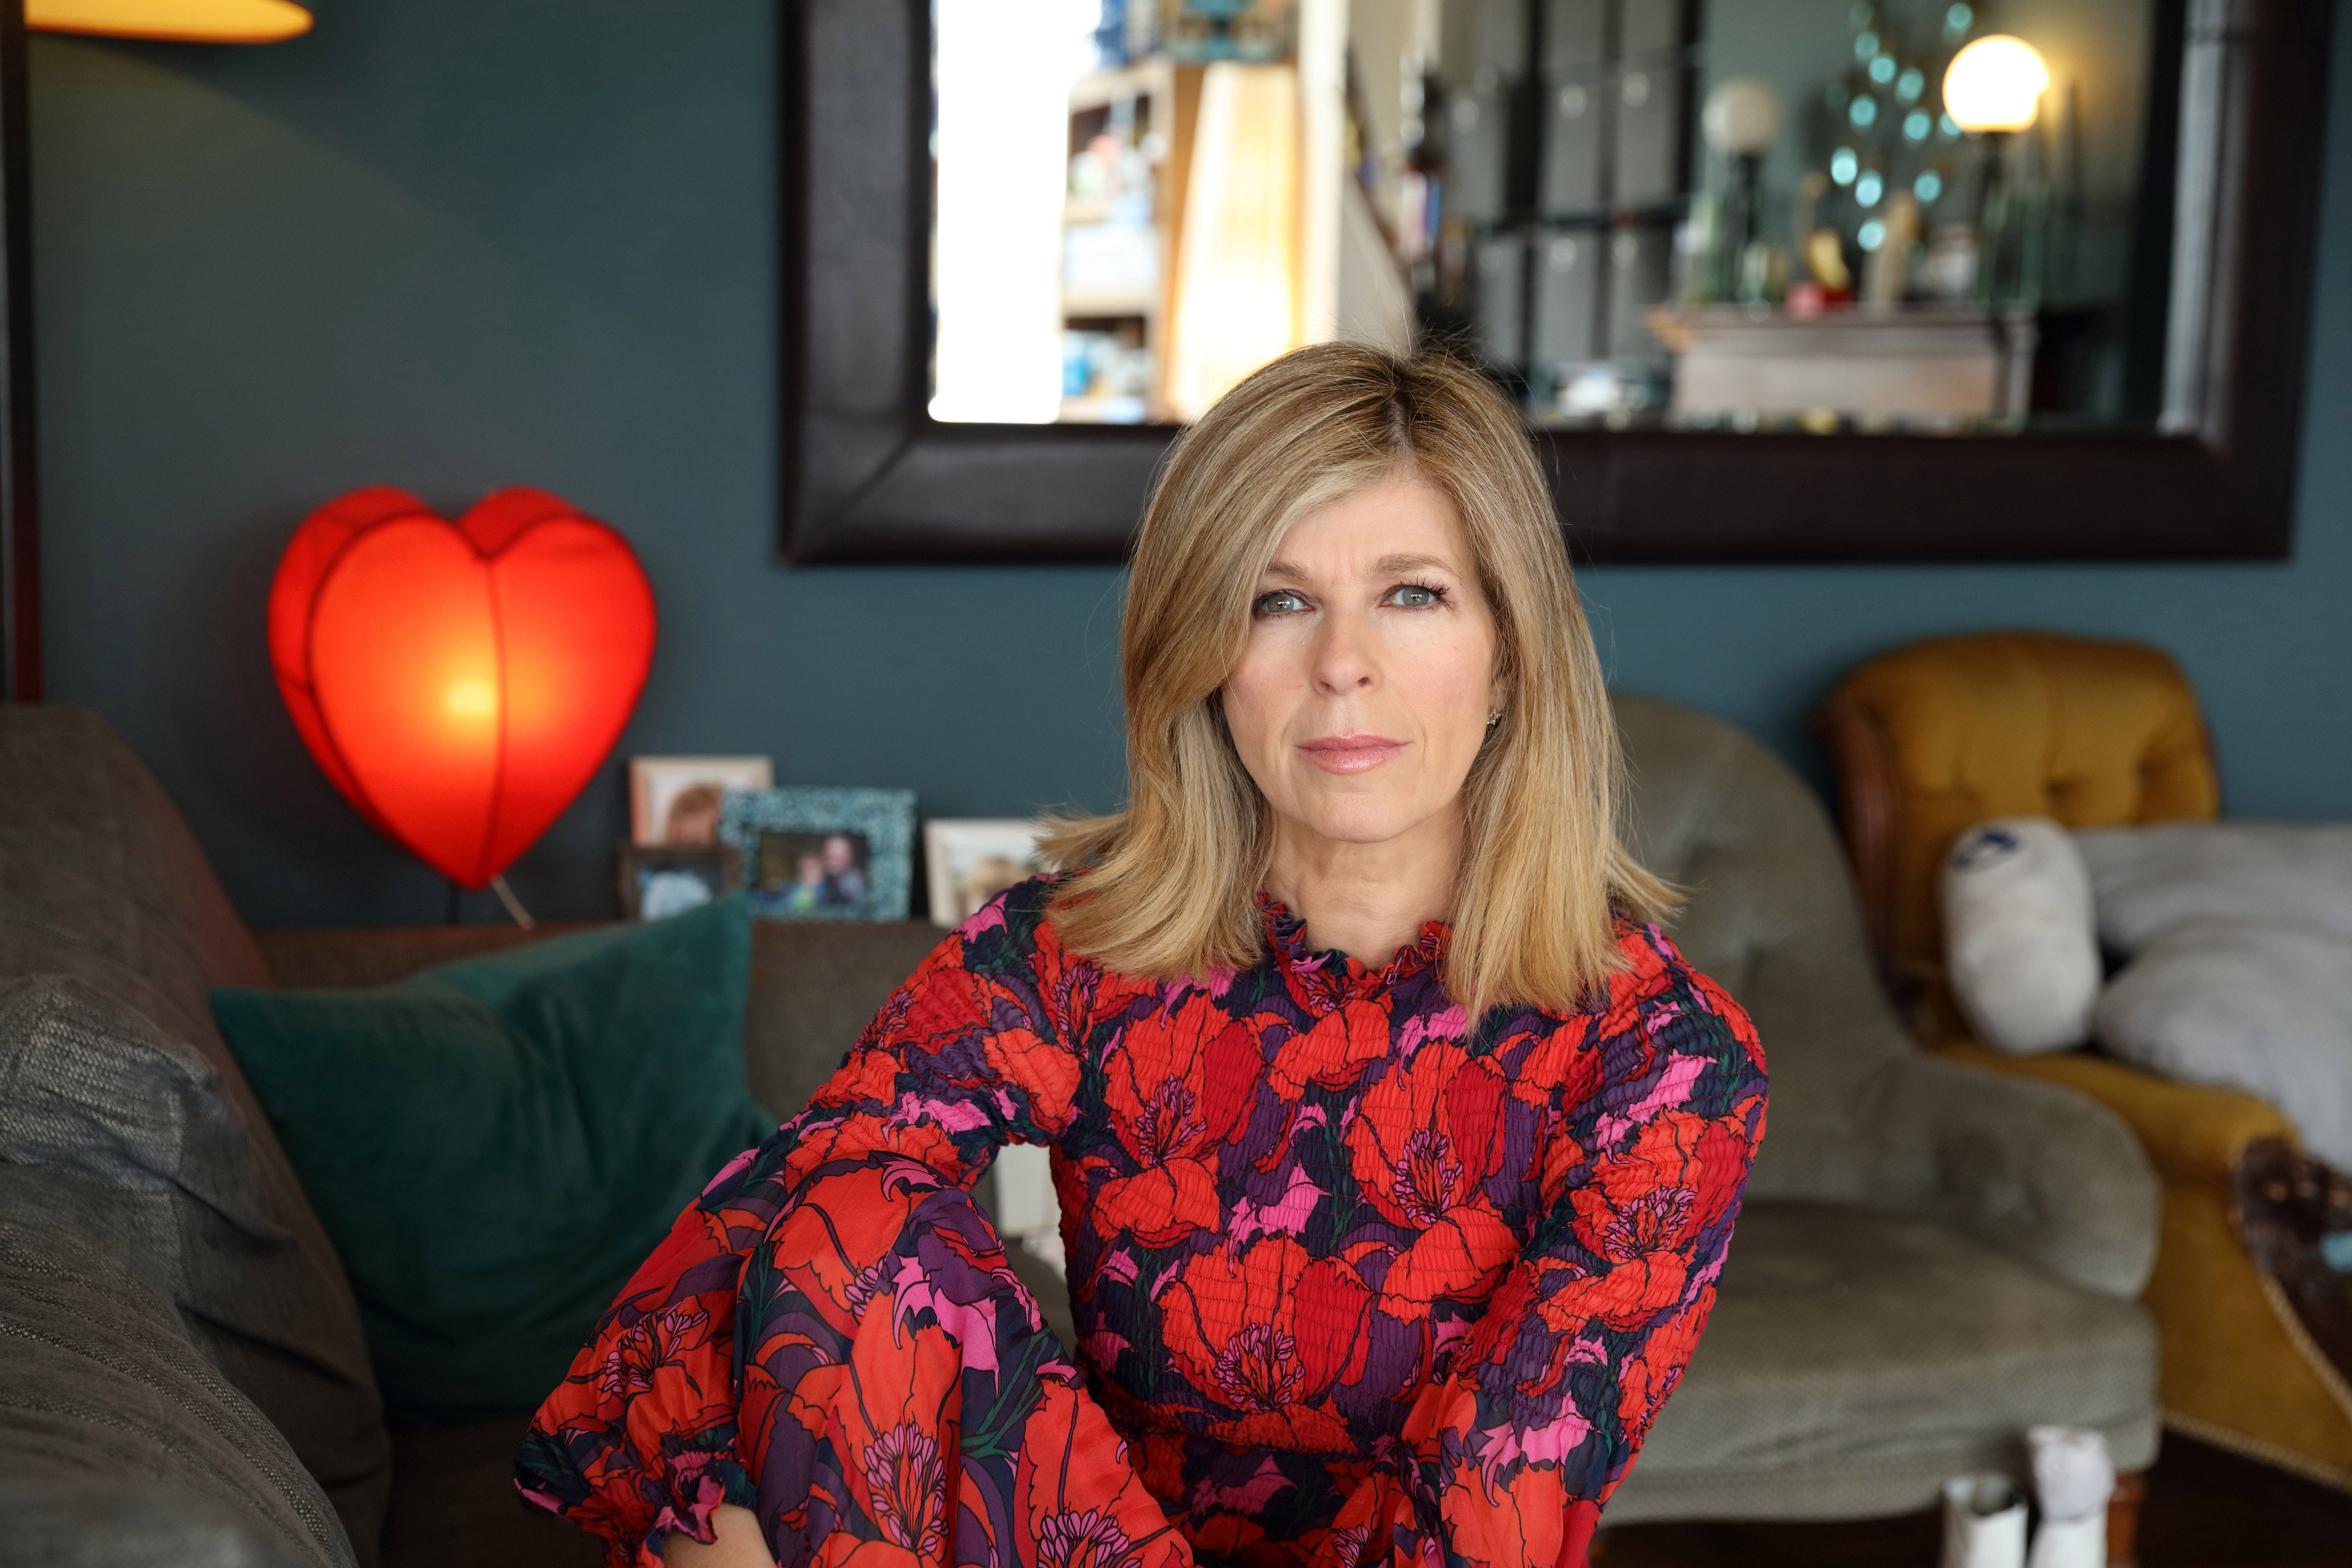 Kate Garraway’s new documentary follows her husband’s illness, after he was hospitalised with Covid in 2020